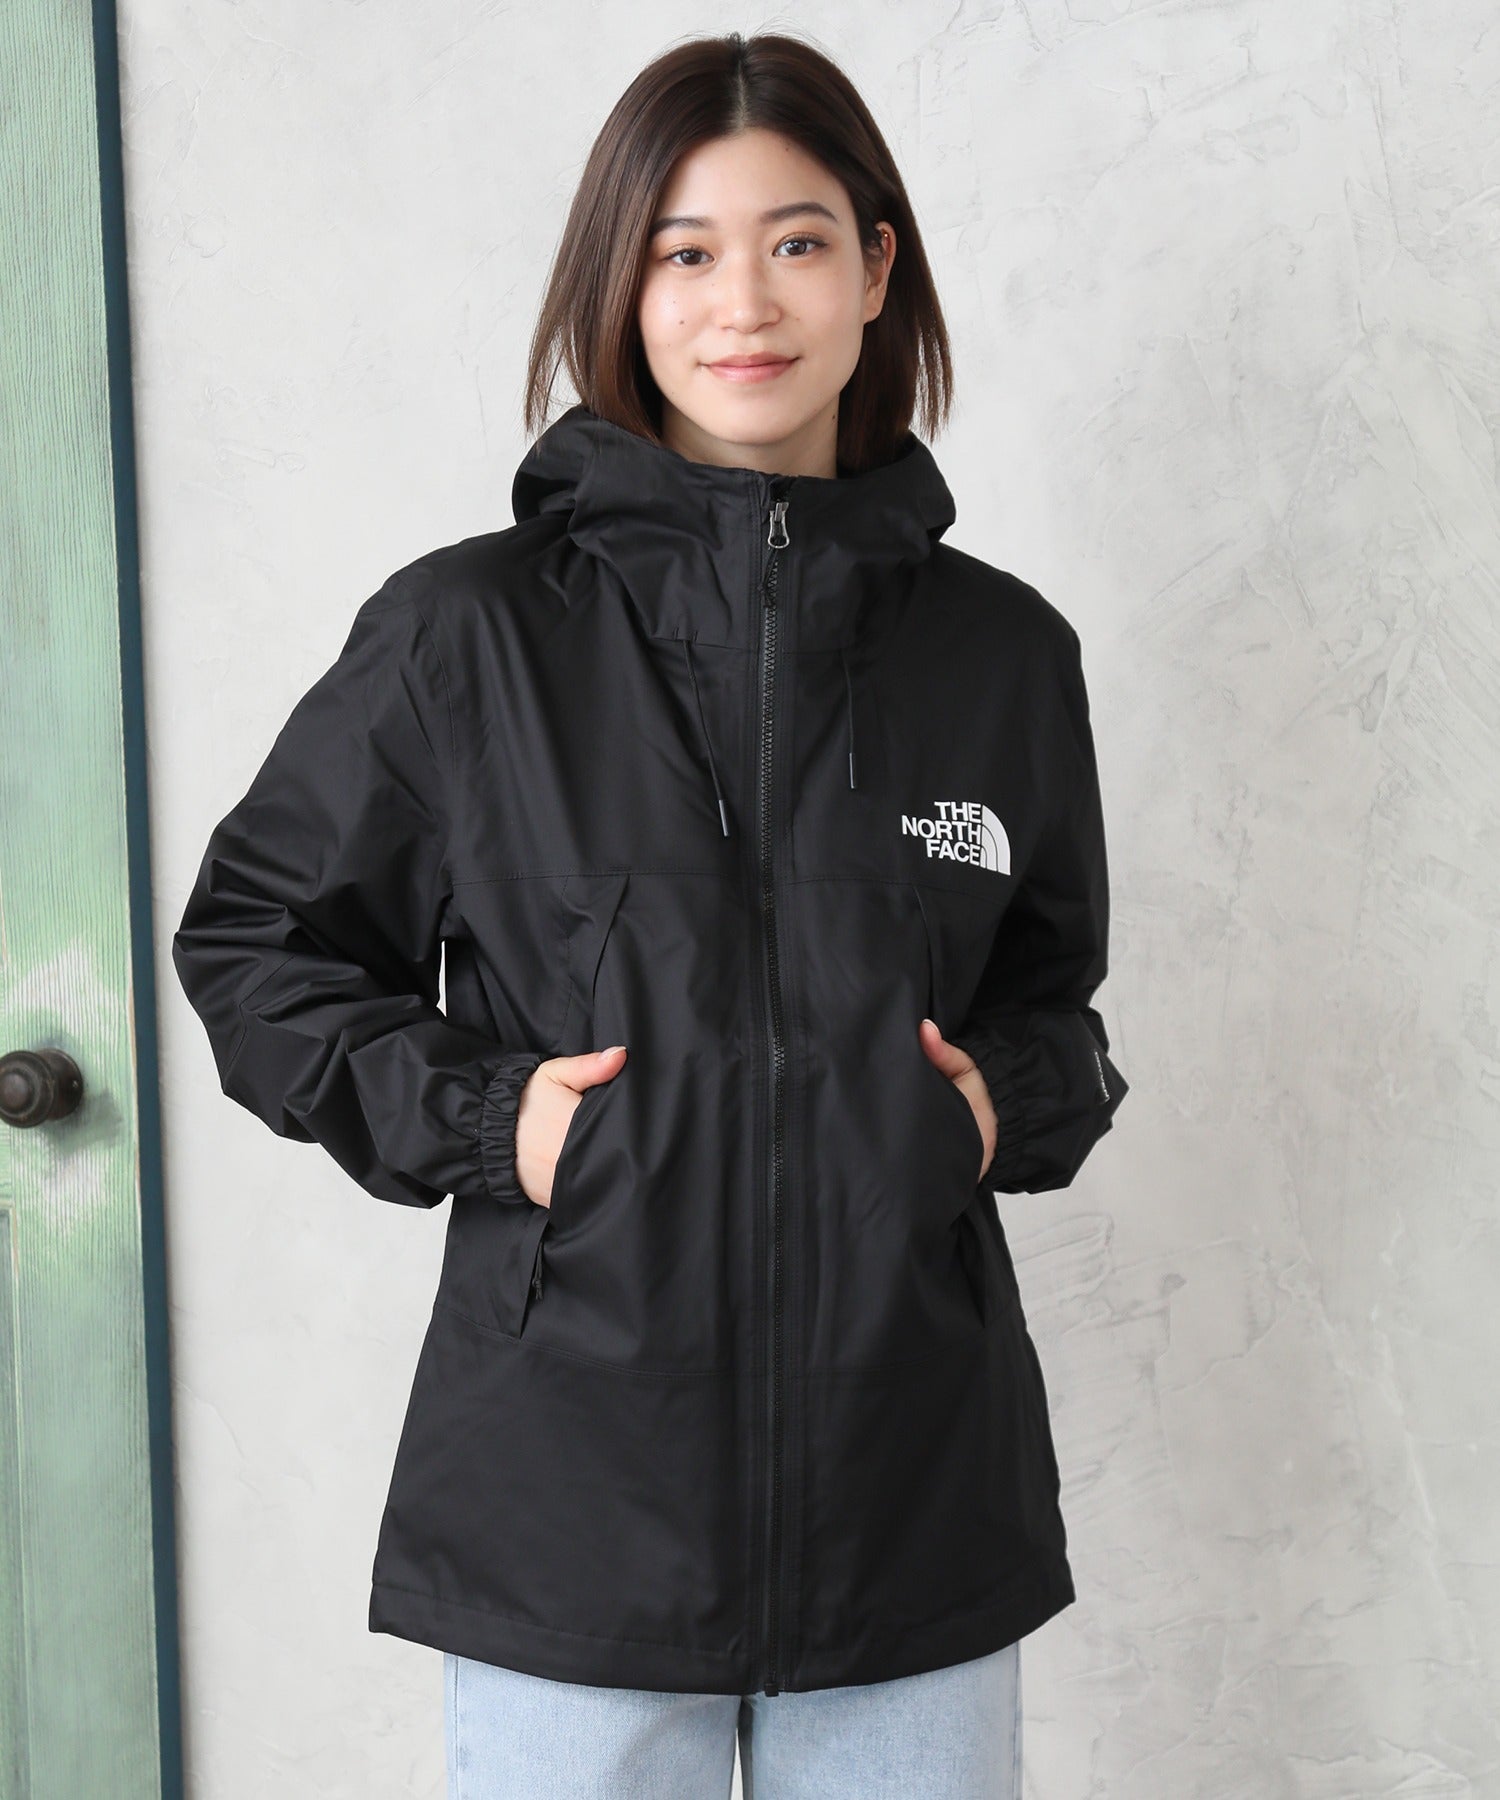 THE NORTH FACE/ザノースフェイス MOUNTAIN QUEST JACKET